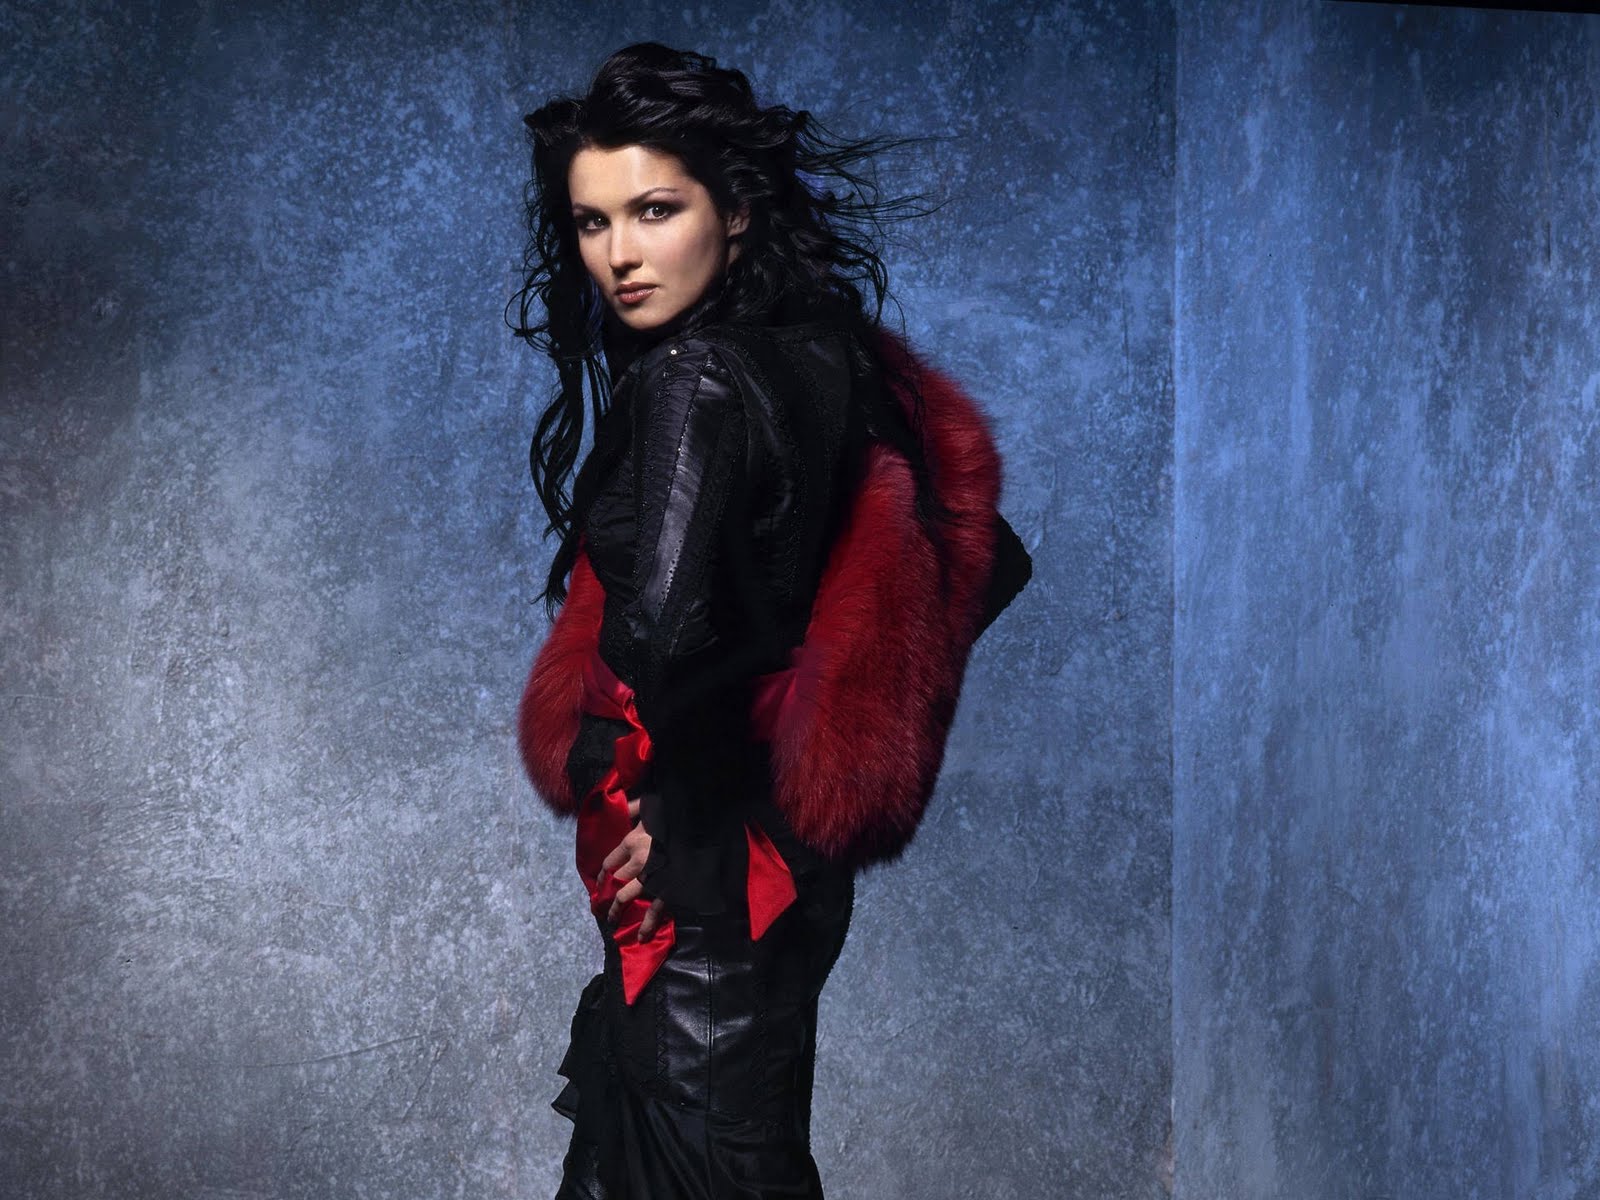 Hot Anna Netrebko | Girls Pictures | Top Models | Hot Actress | Hot Girl | Hot Pictures1600 x 1200